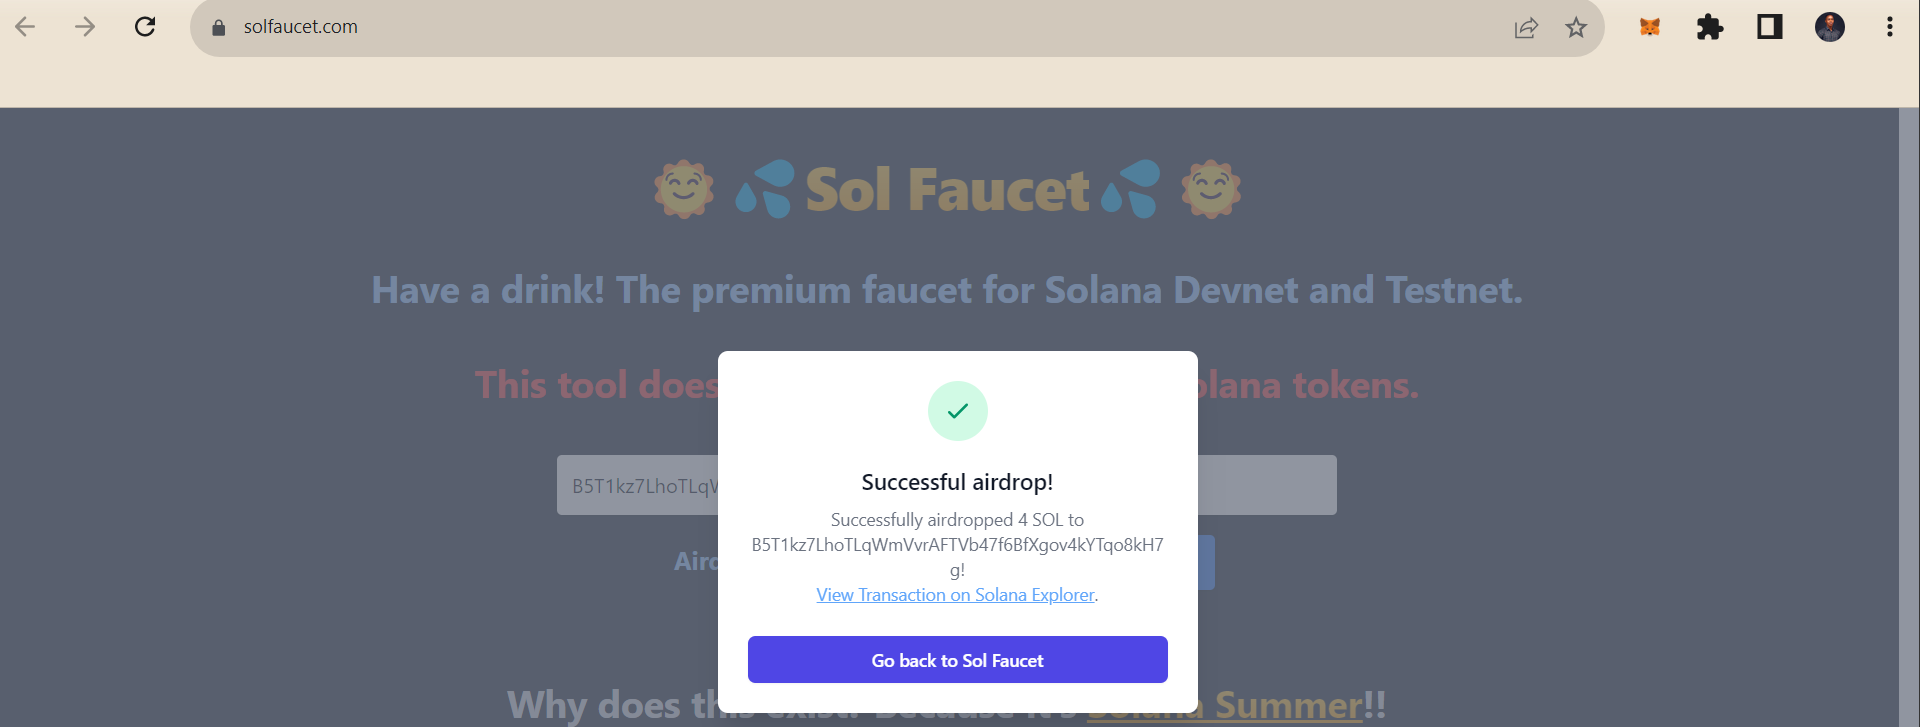 Successful airdrop of 4 devnet SOL tokens from solfaucet.com